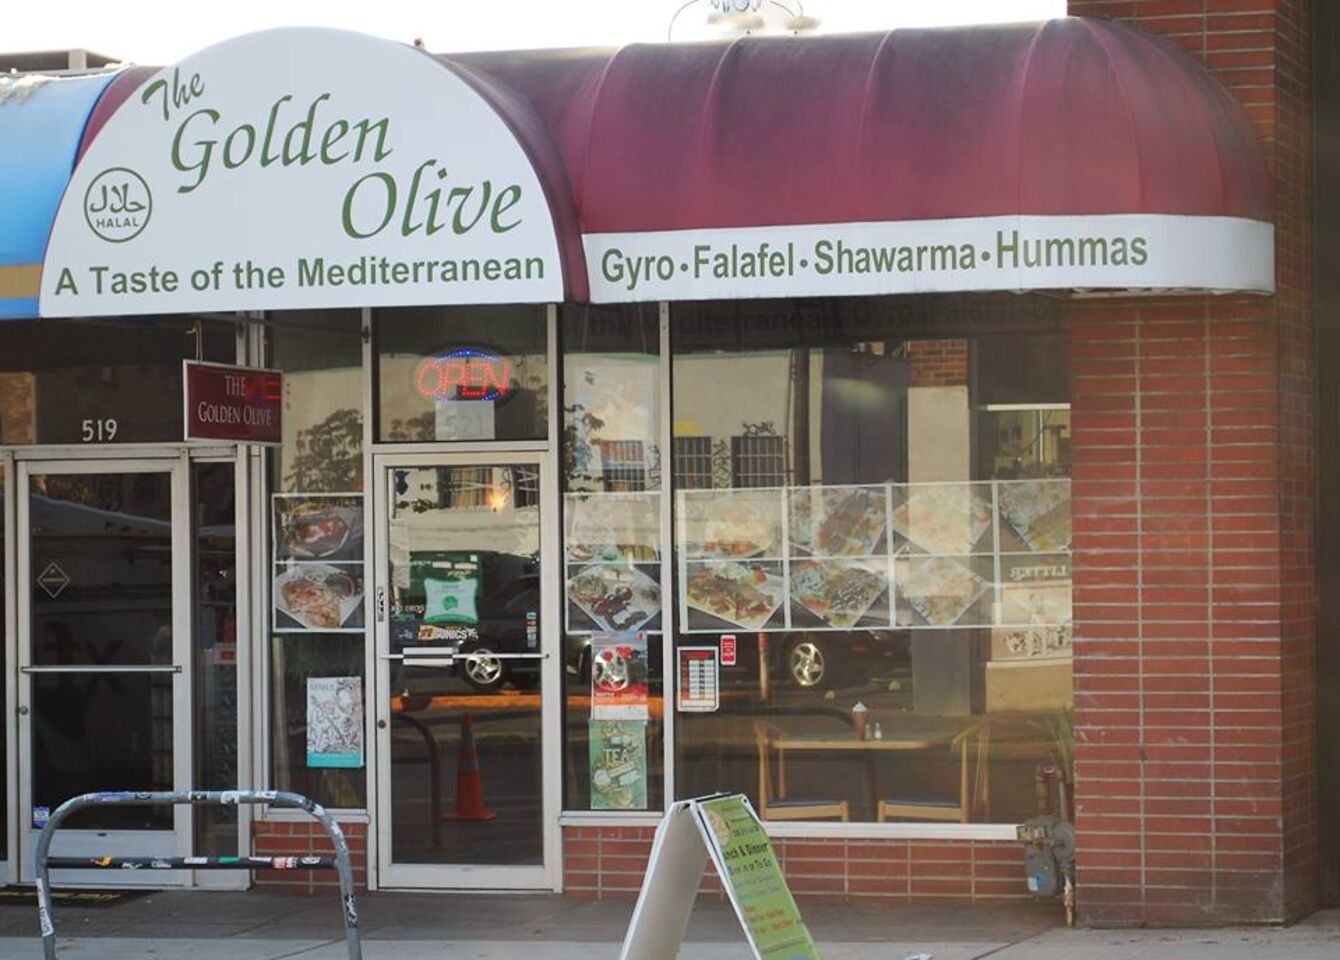 A photo of The Golden Olive